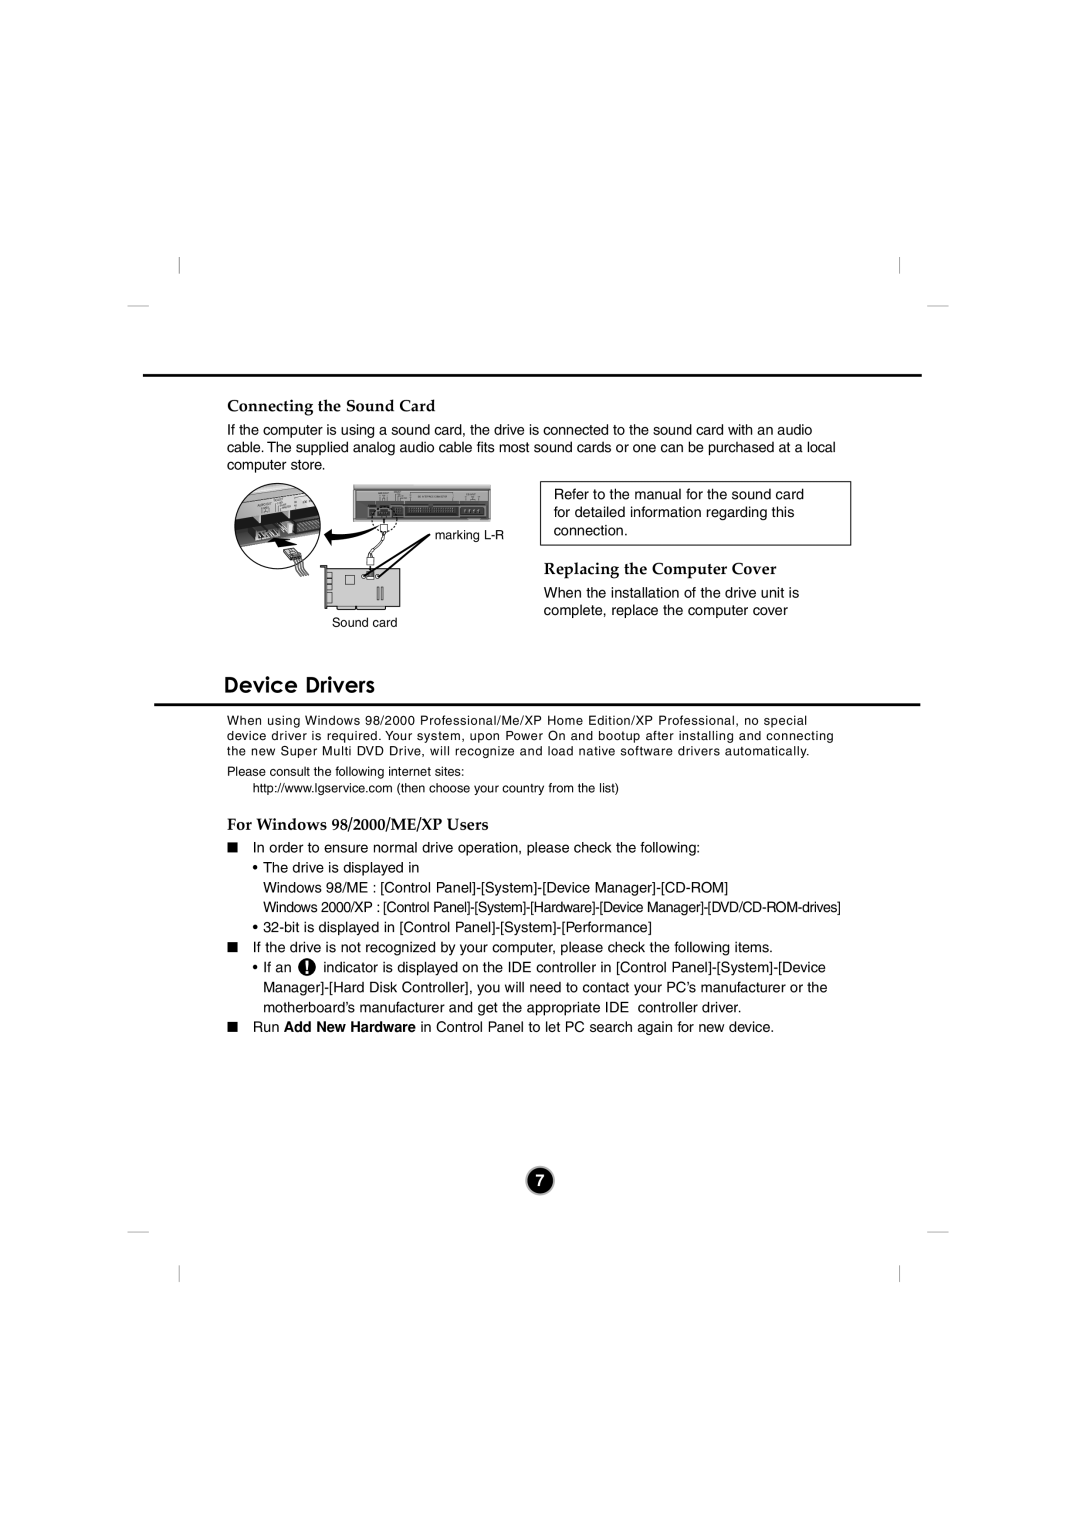 LG Electronics GSA-4082B manual Device Drivers, Connecting the Sound Card, Replacing the Computer Cover 